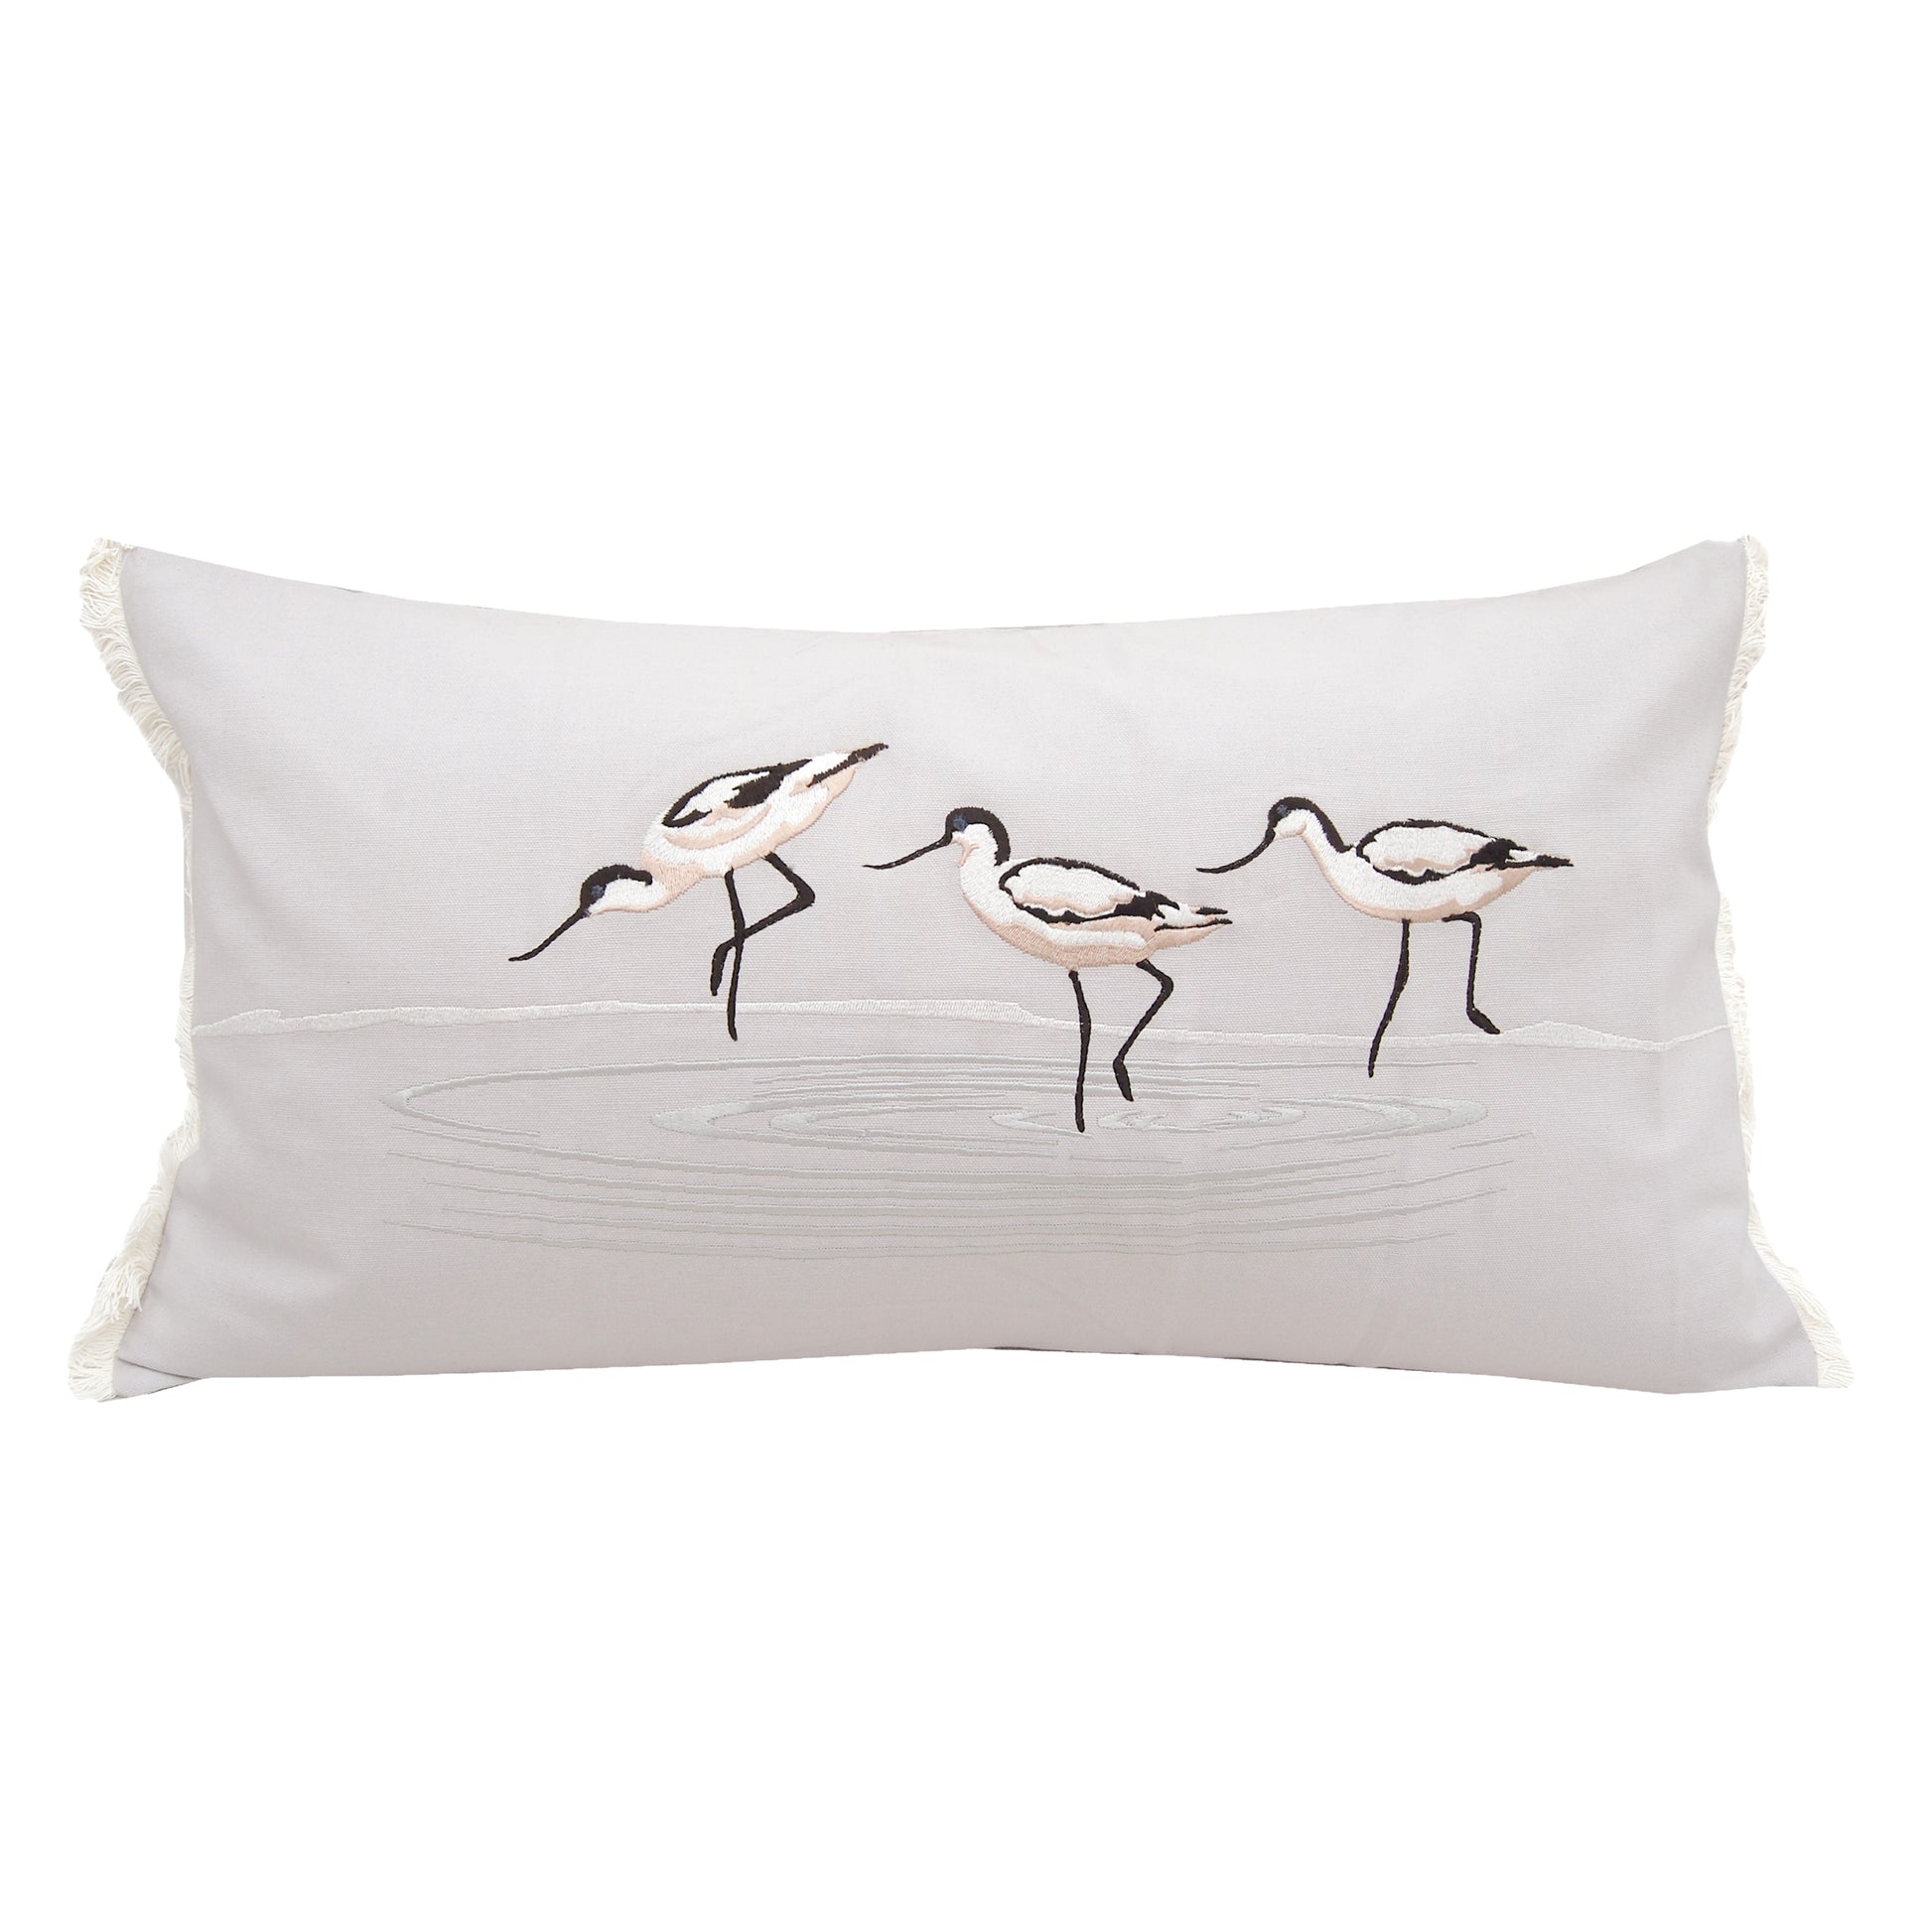 Three avocent birds wading through a pool of water; embroidered on a soft grey background with white fringe edging. Lumbar indoor pillow.